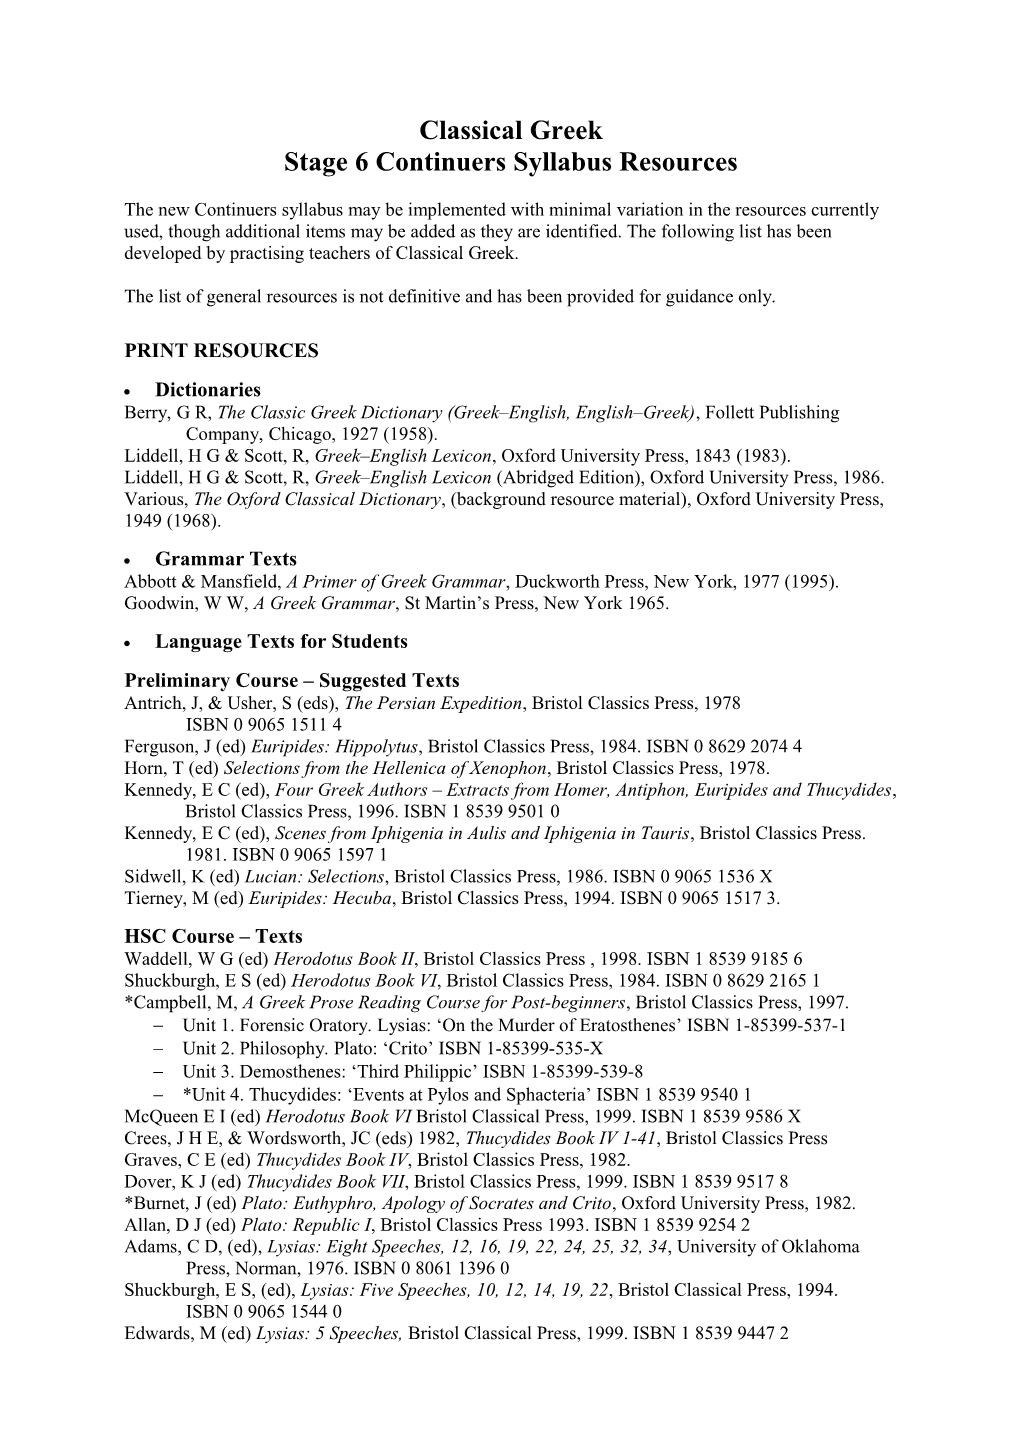 Classical Greek - Stage 6 Continuers Syllabus Resources